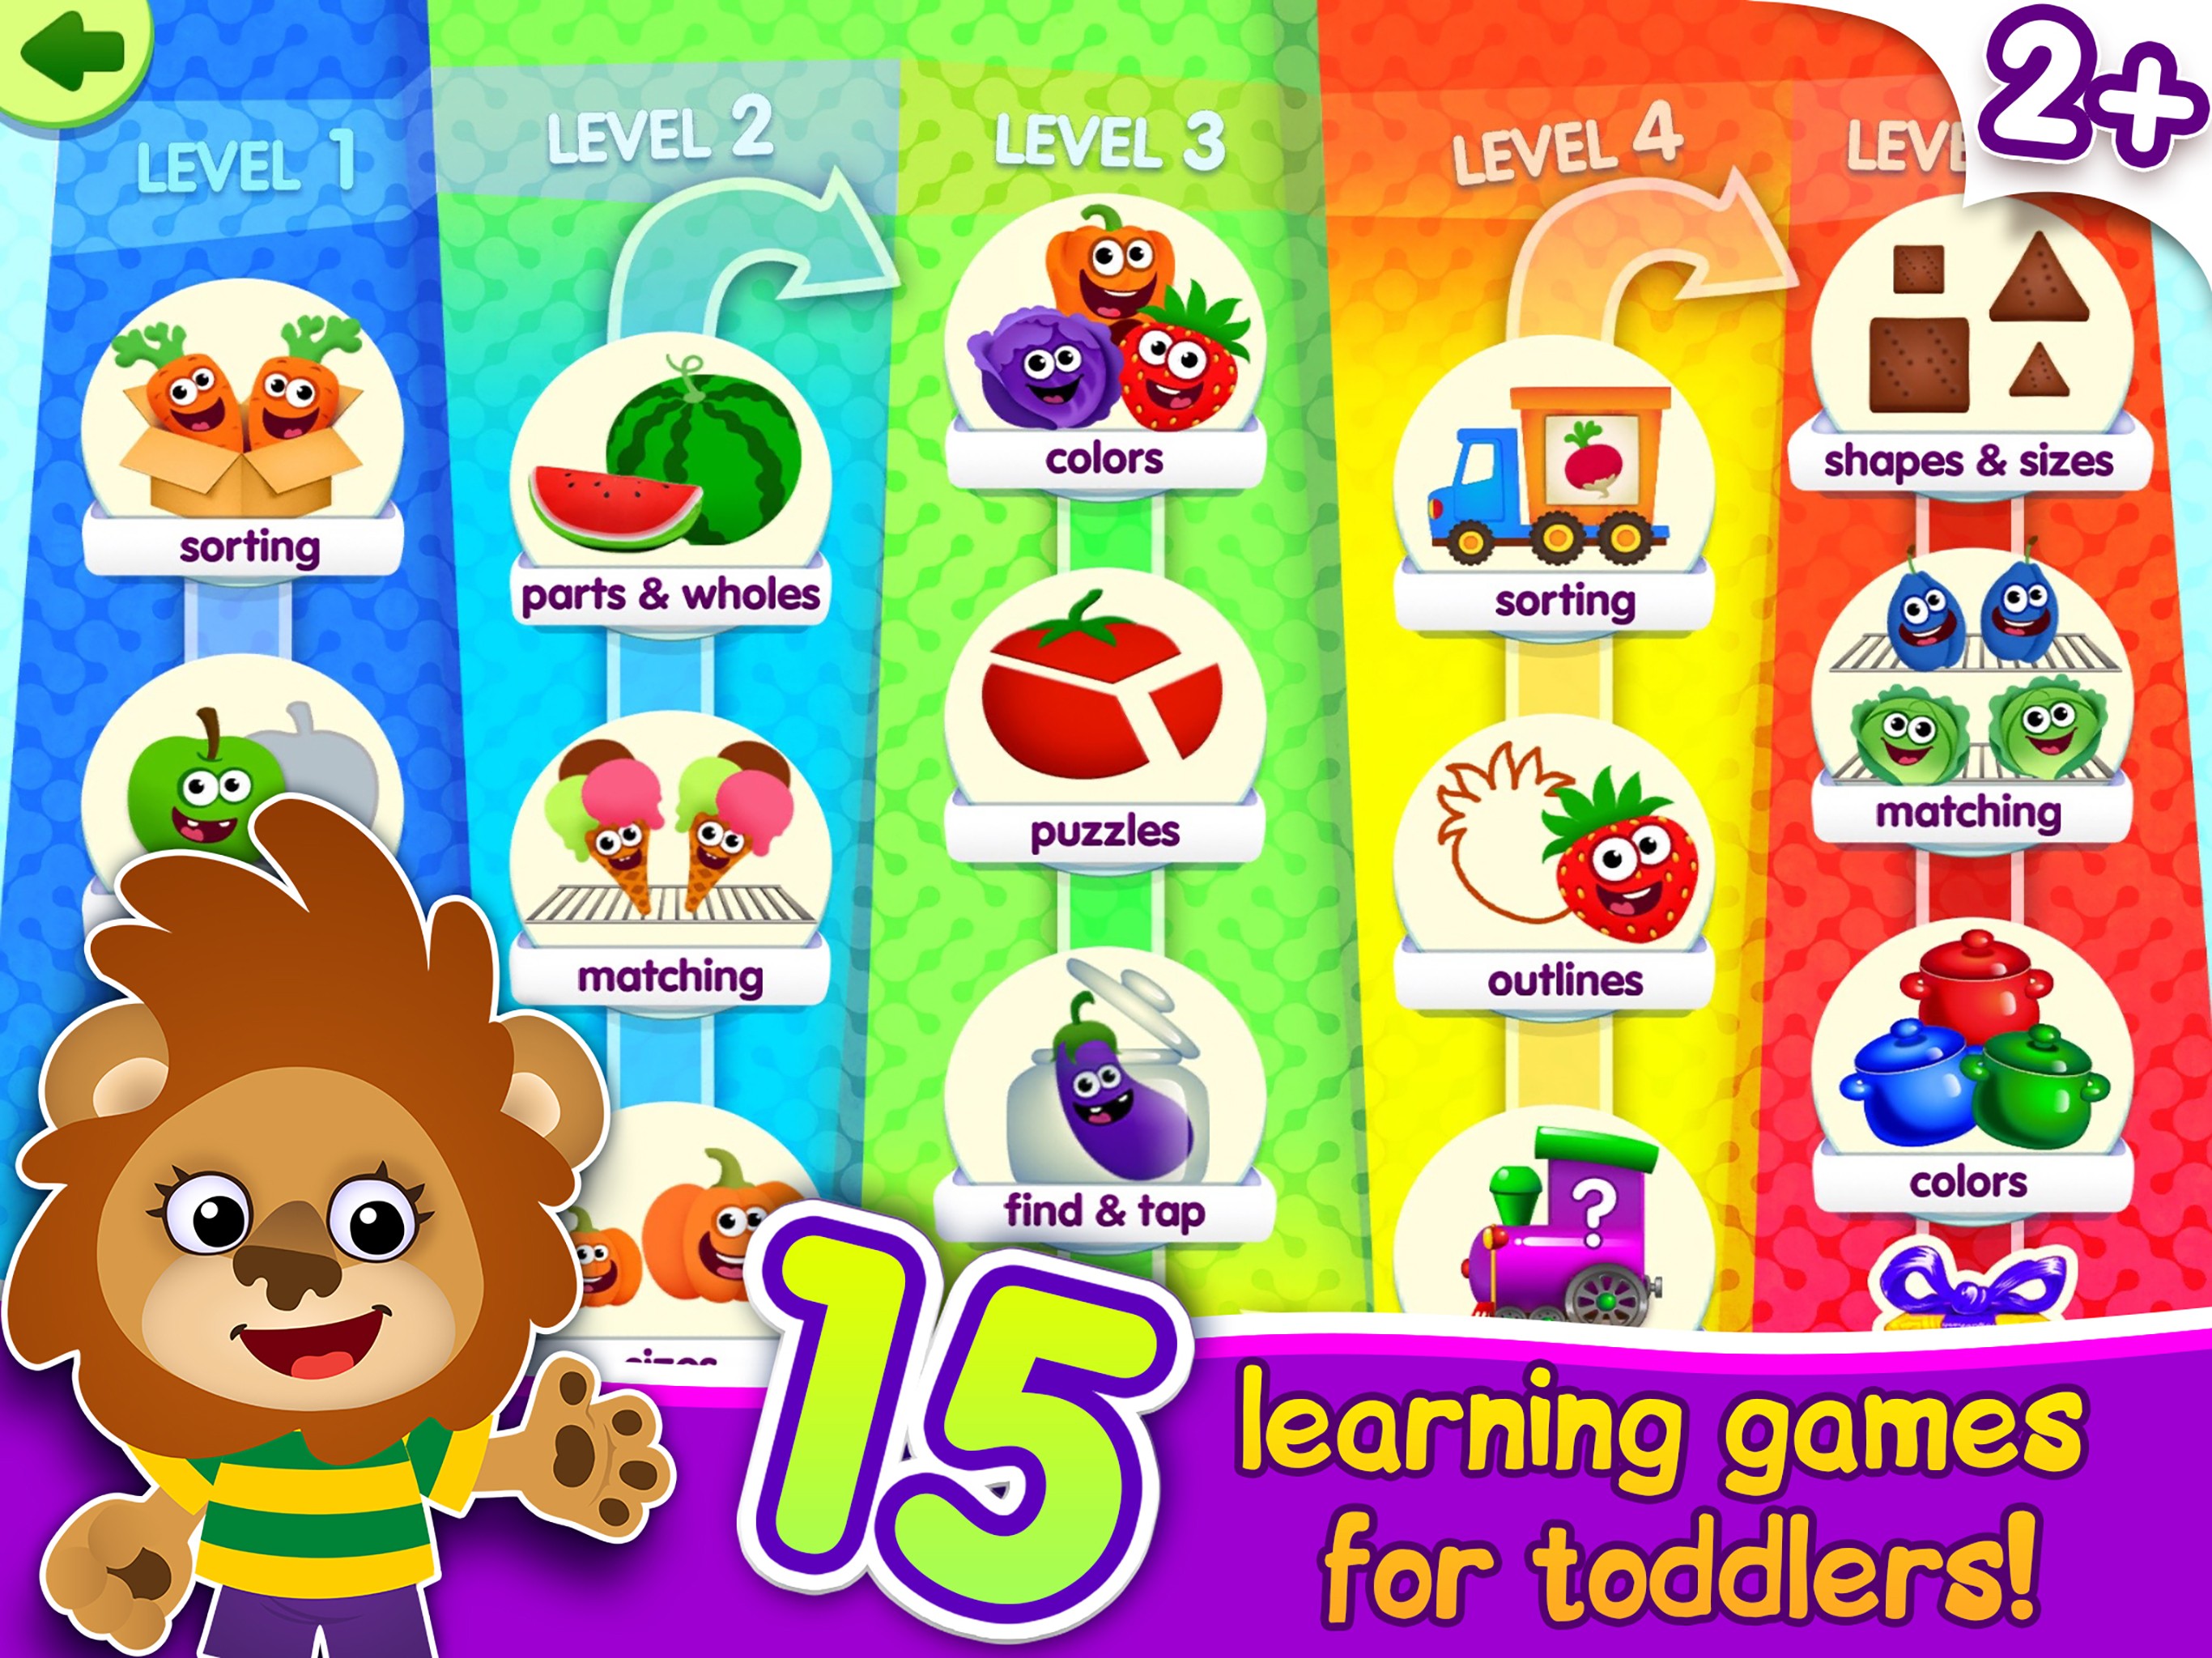 Baby smart games for kids! Learn shapes and colors